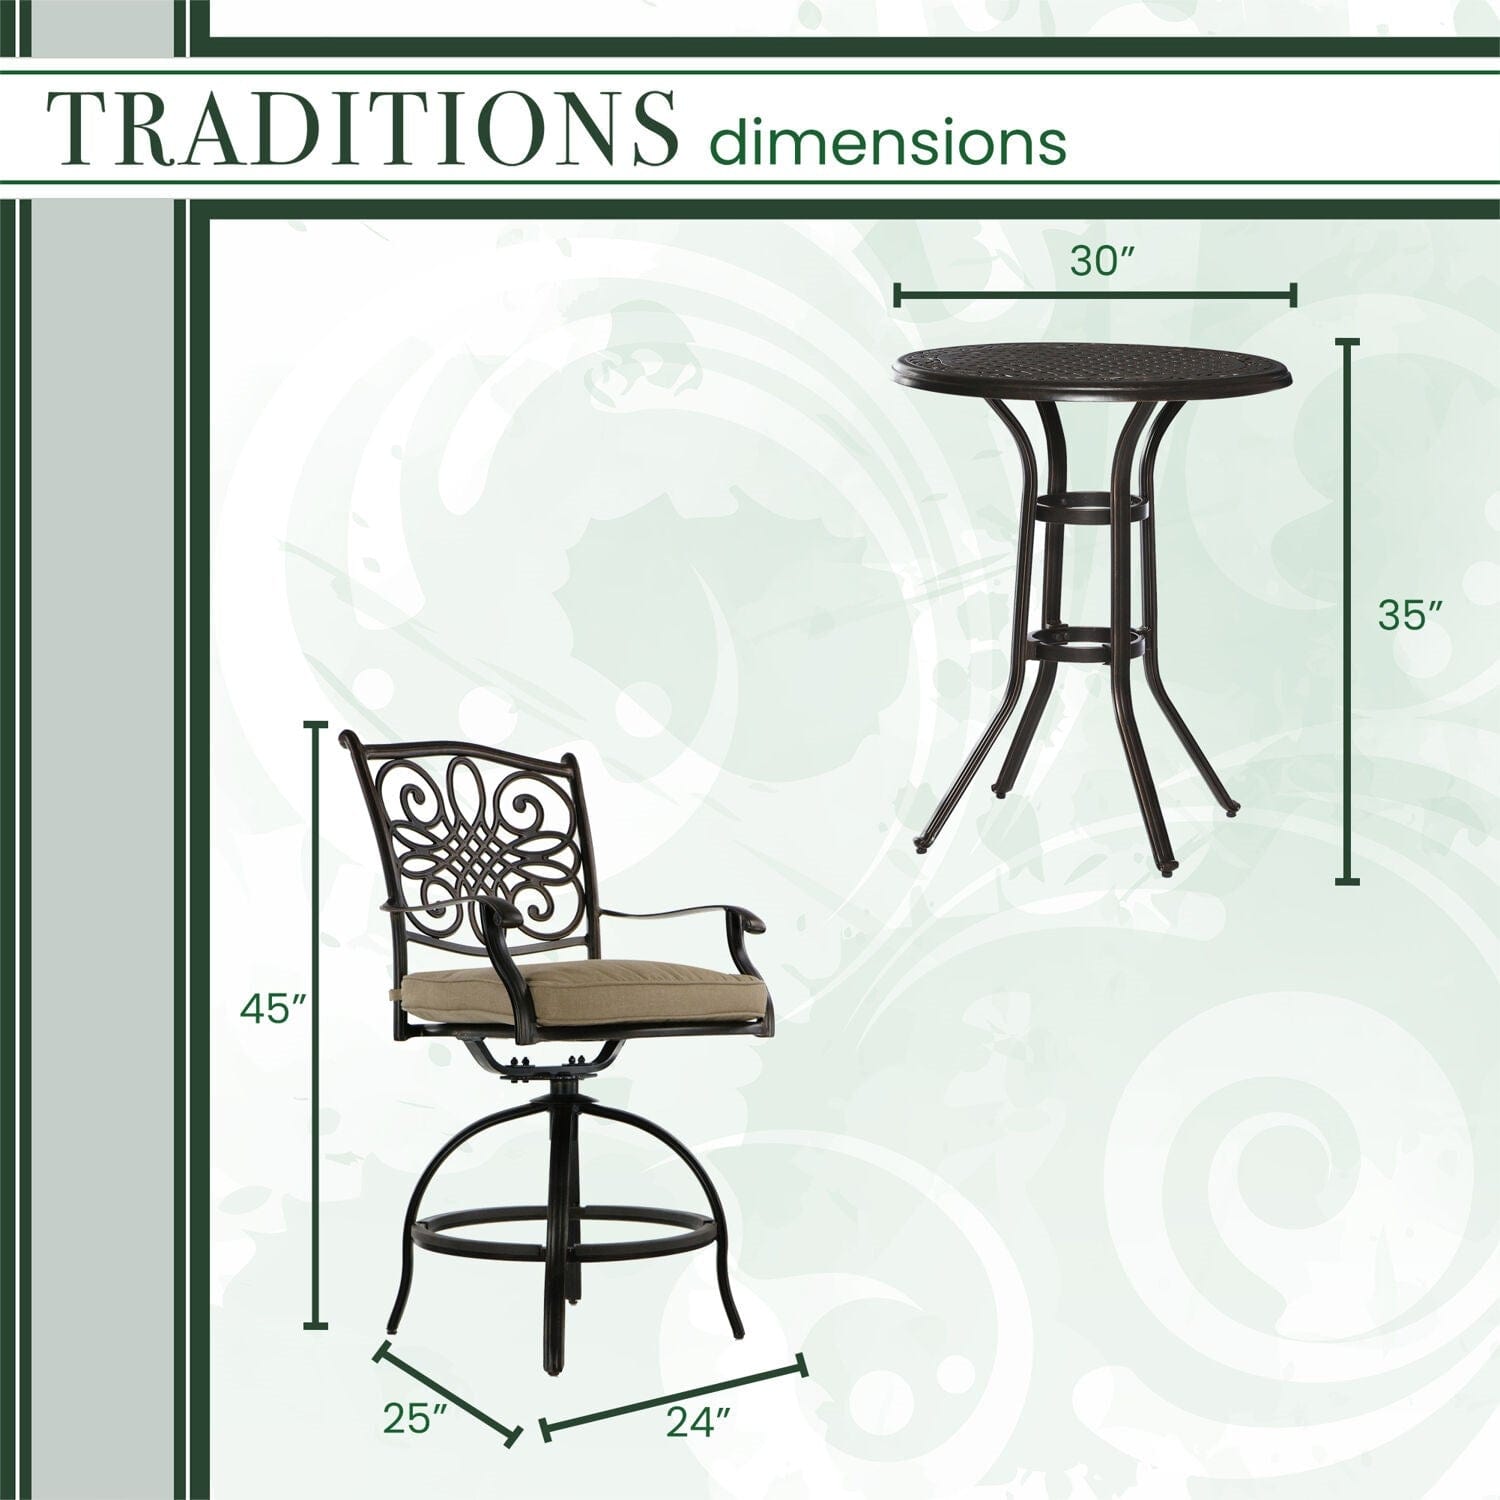 Hanover Bistro Set Hanover Traditions 3-Piece High-Dining Bistro Set in Natural Oat/Bronze | Aluminum Frame | TRADDN3PCSW-BR